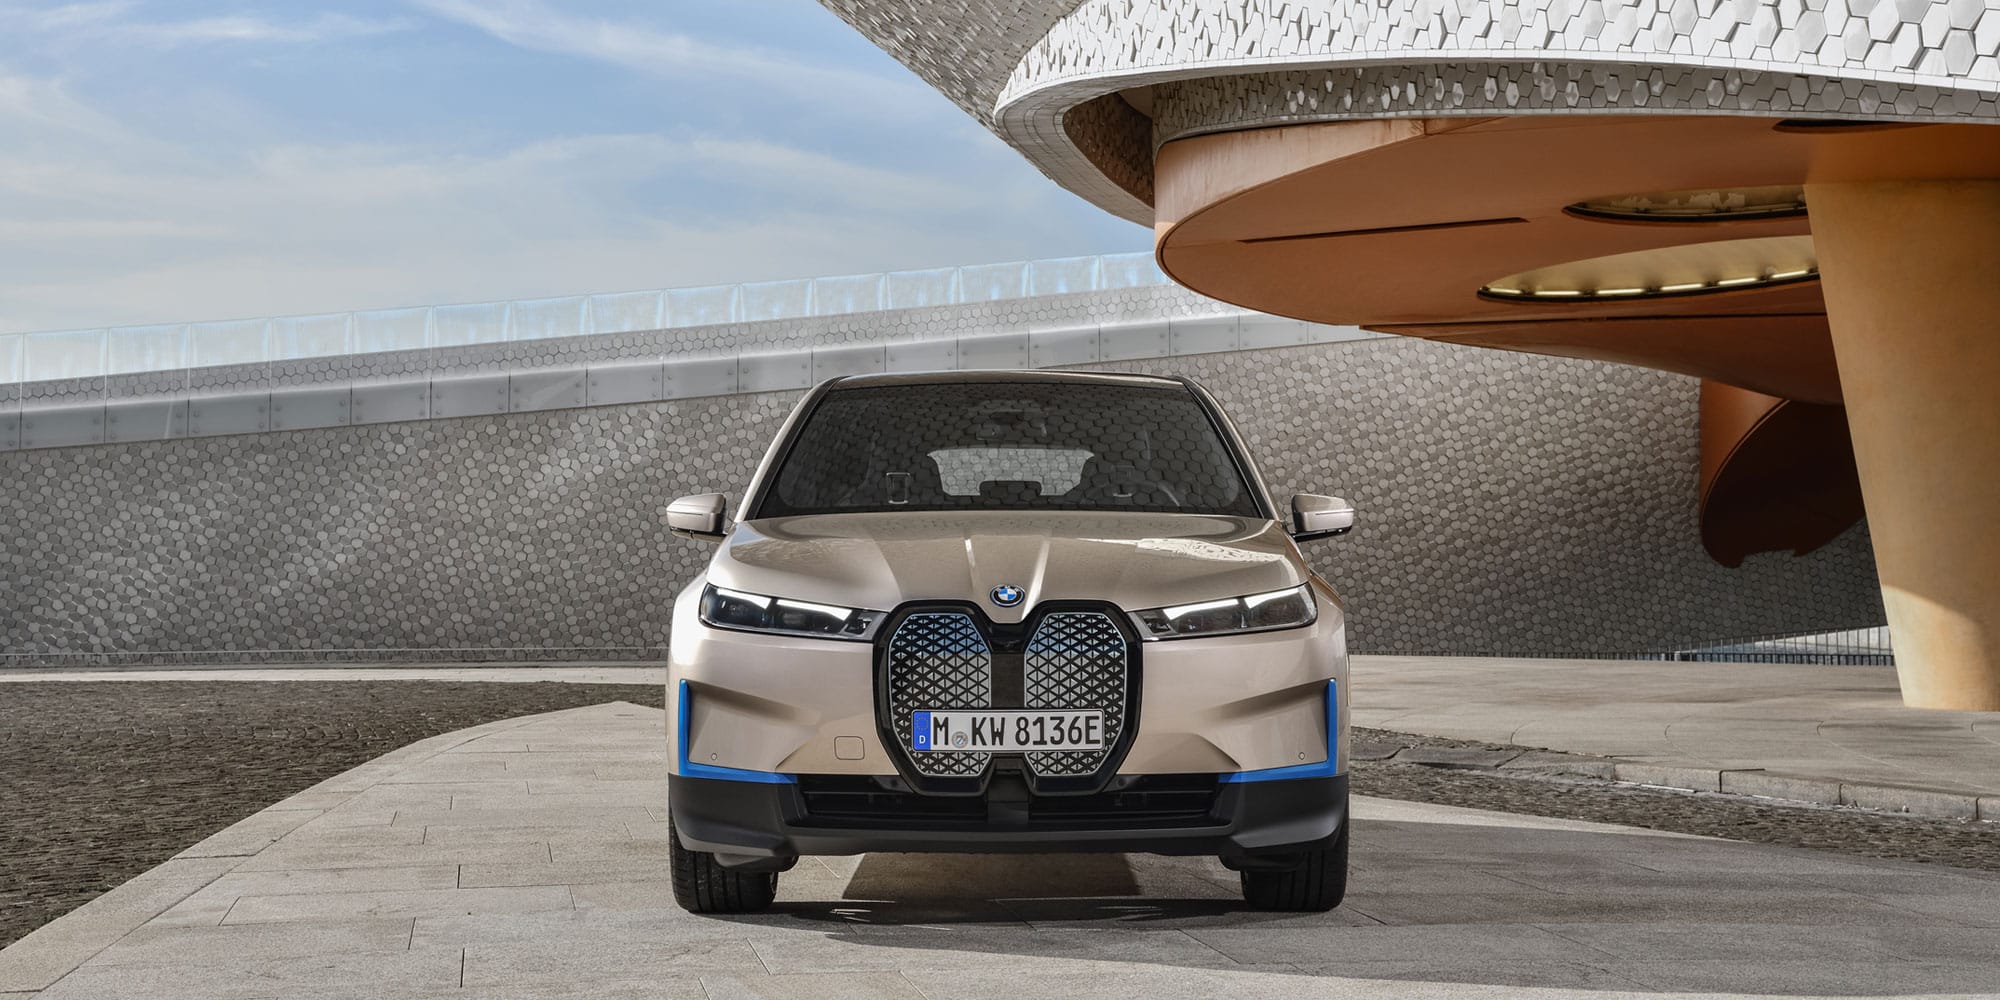 Tested: Why BMW's Flagship IX Electric Car Needs To Be Driven